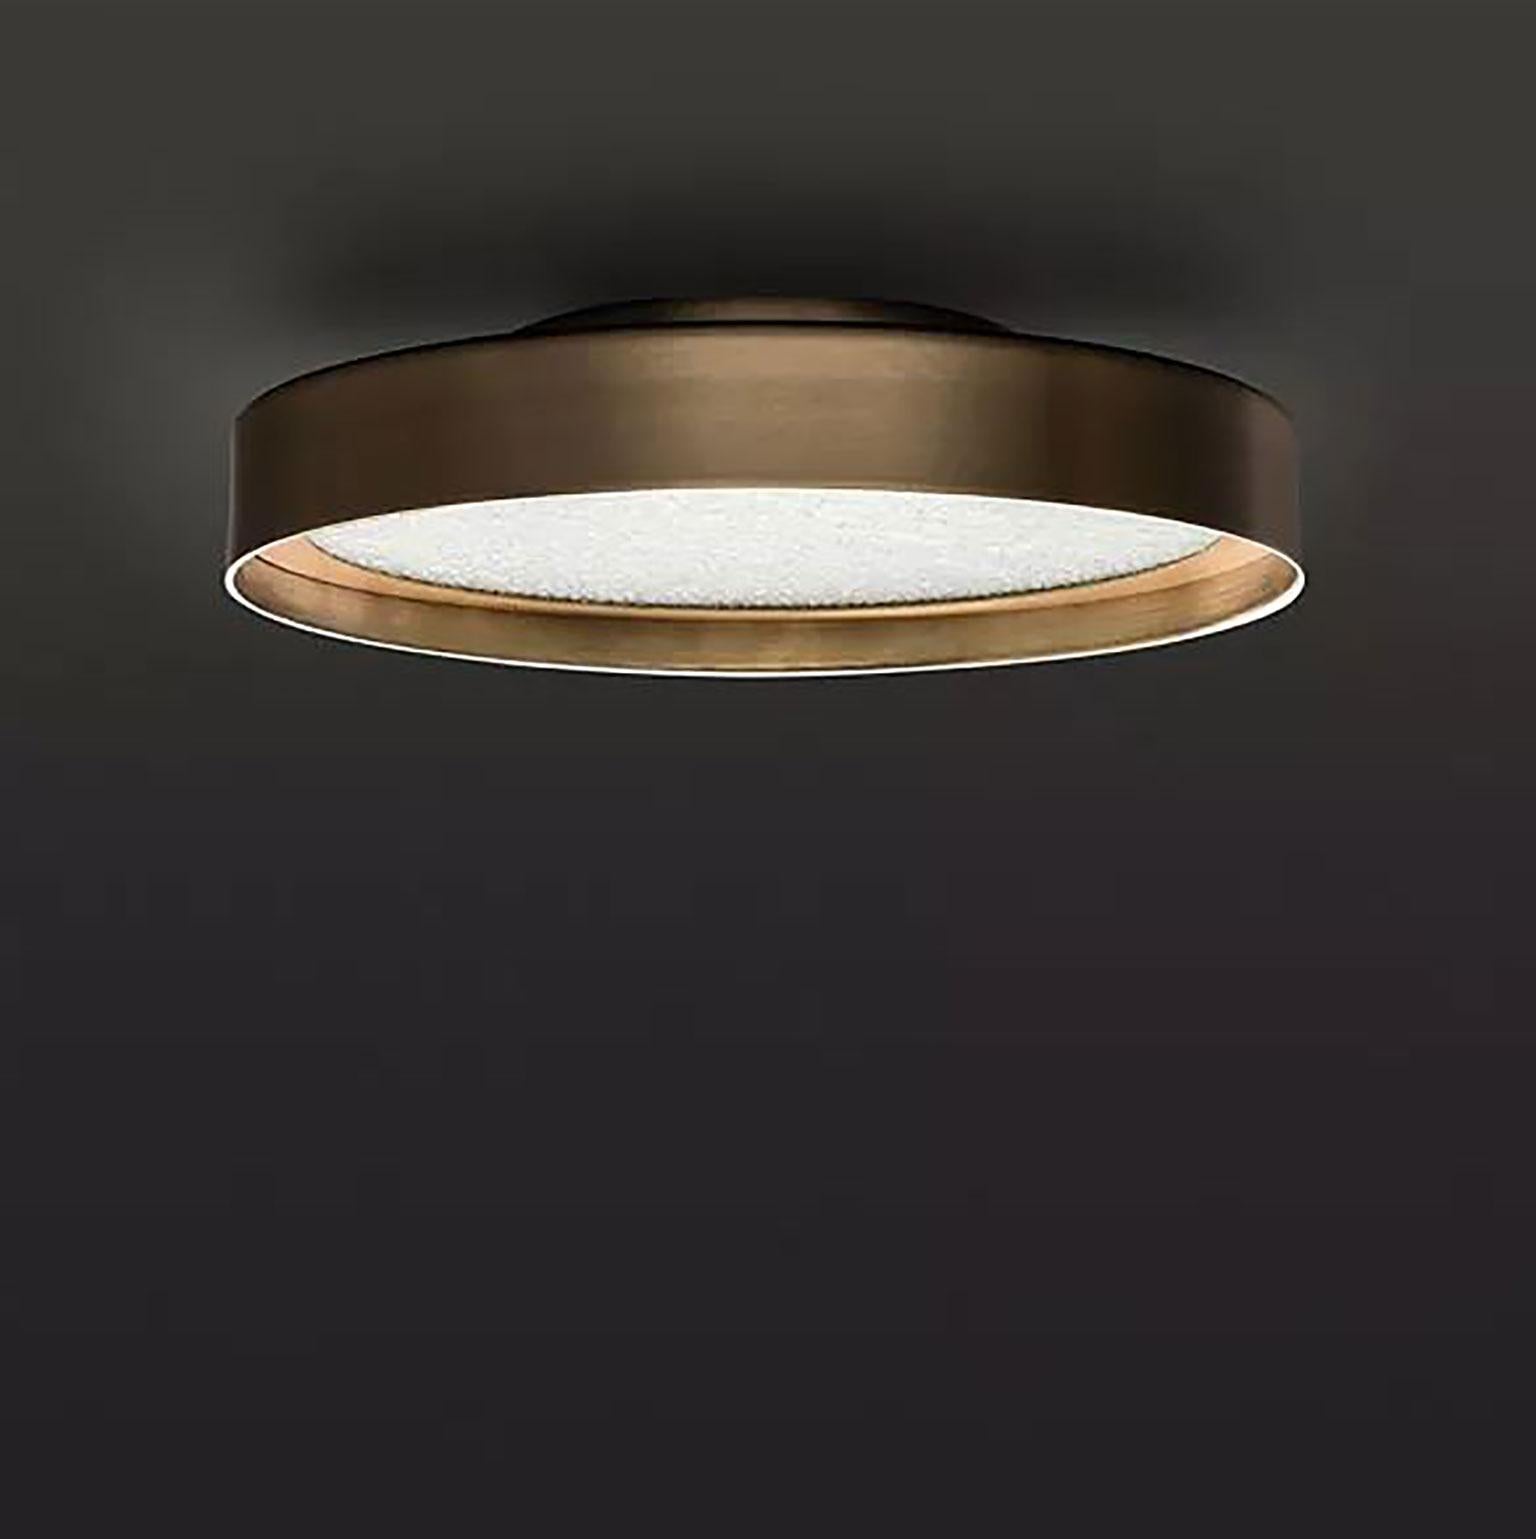 Berlin wall/ceiling lamp designed by Christophe Pillet for Oluce in 2017. Transparency of expression and the research for homogeneity are the key principles in the work of Christophe Pillet. The main feature of the lamp is the dual nature of usage.